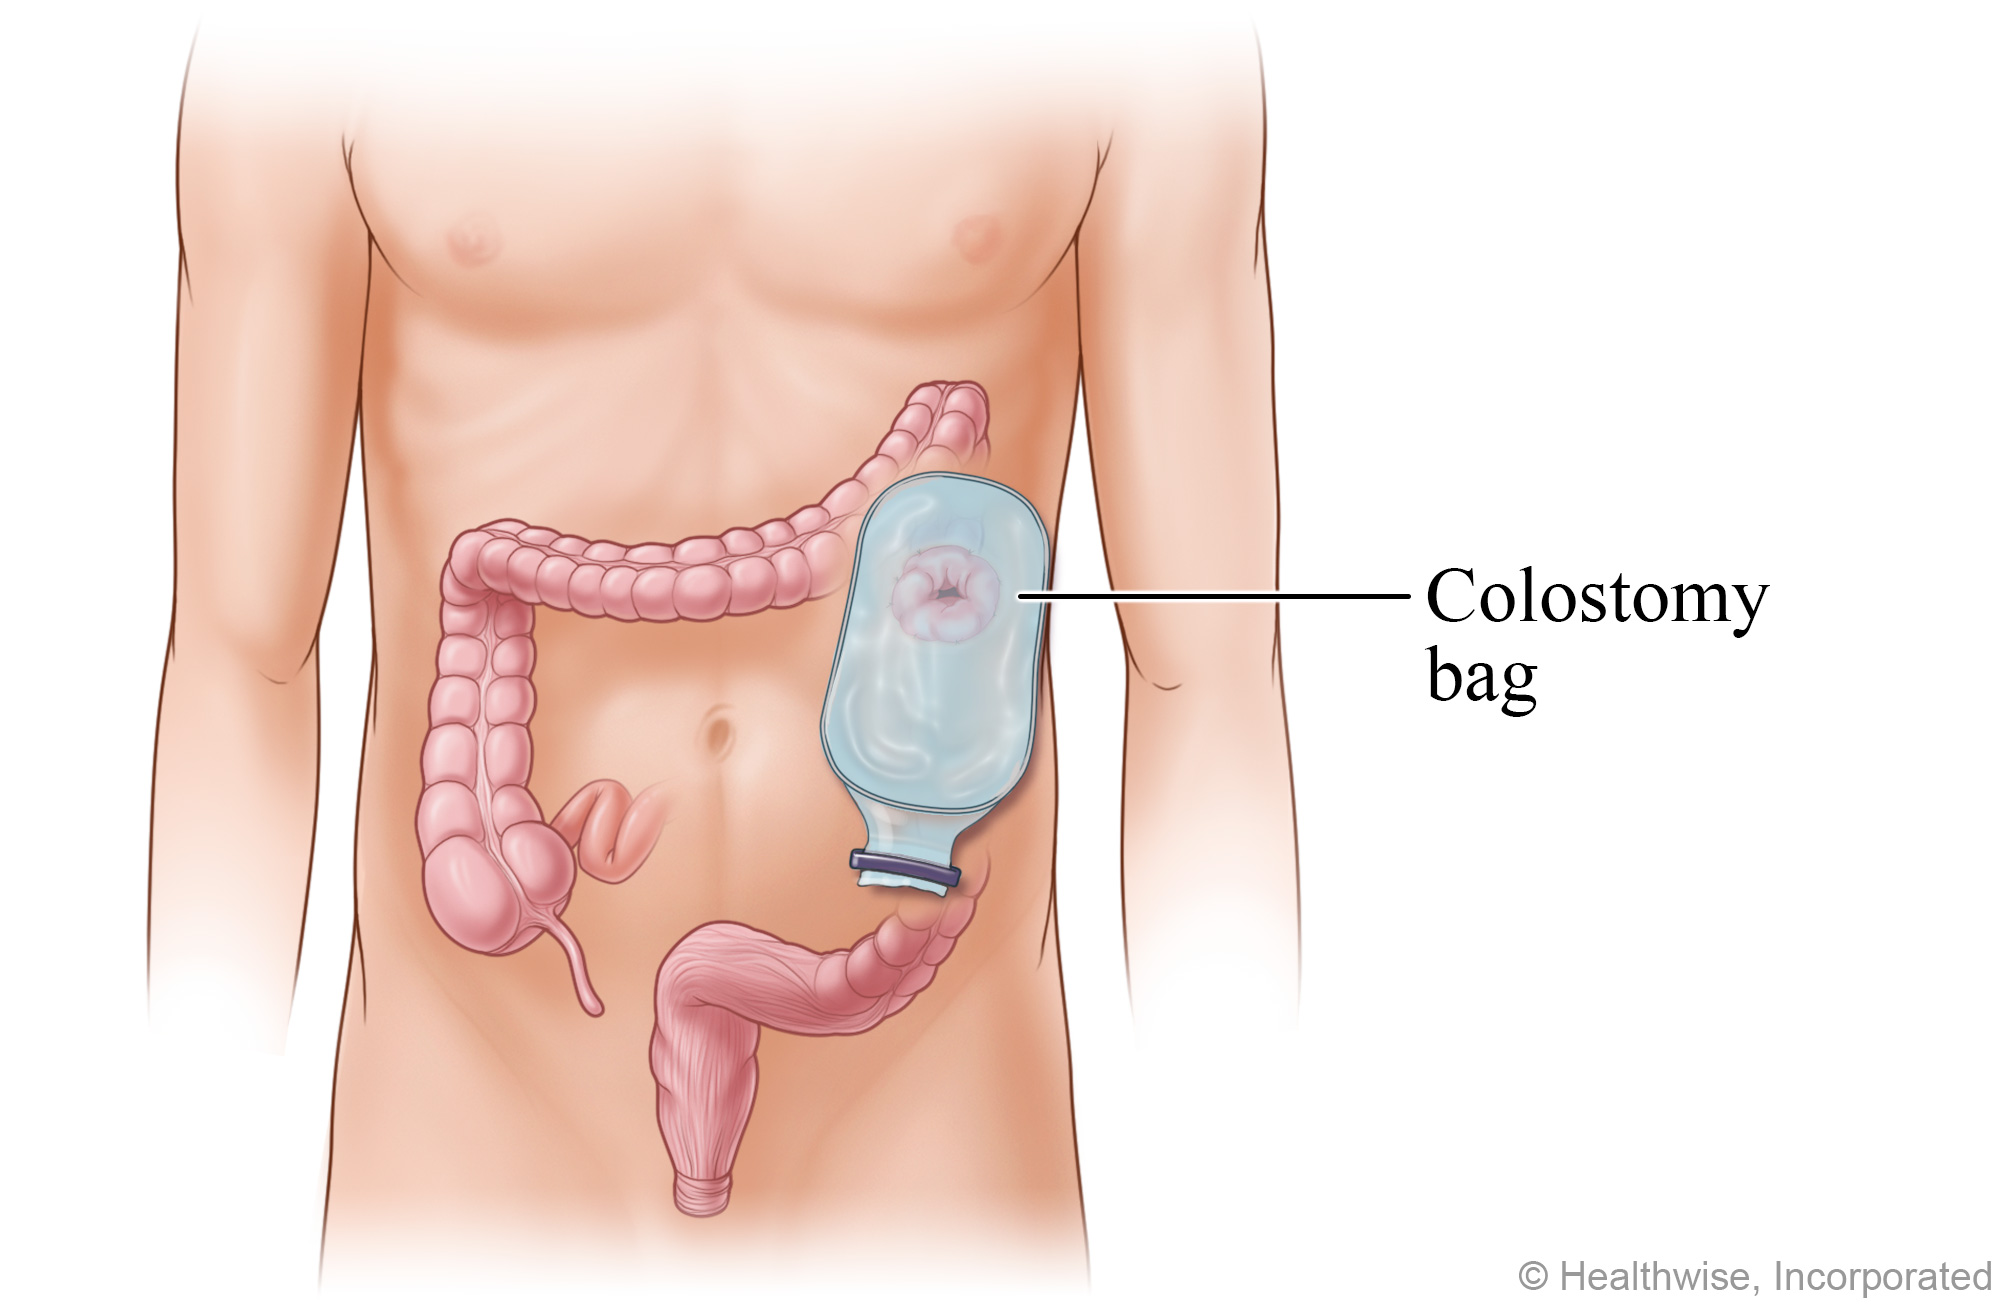 A colostomy bag positioned on the stoma.